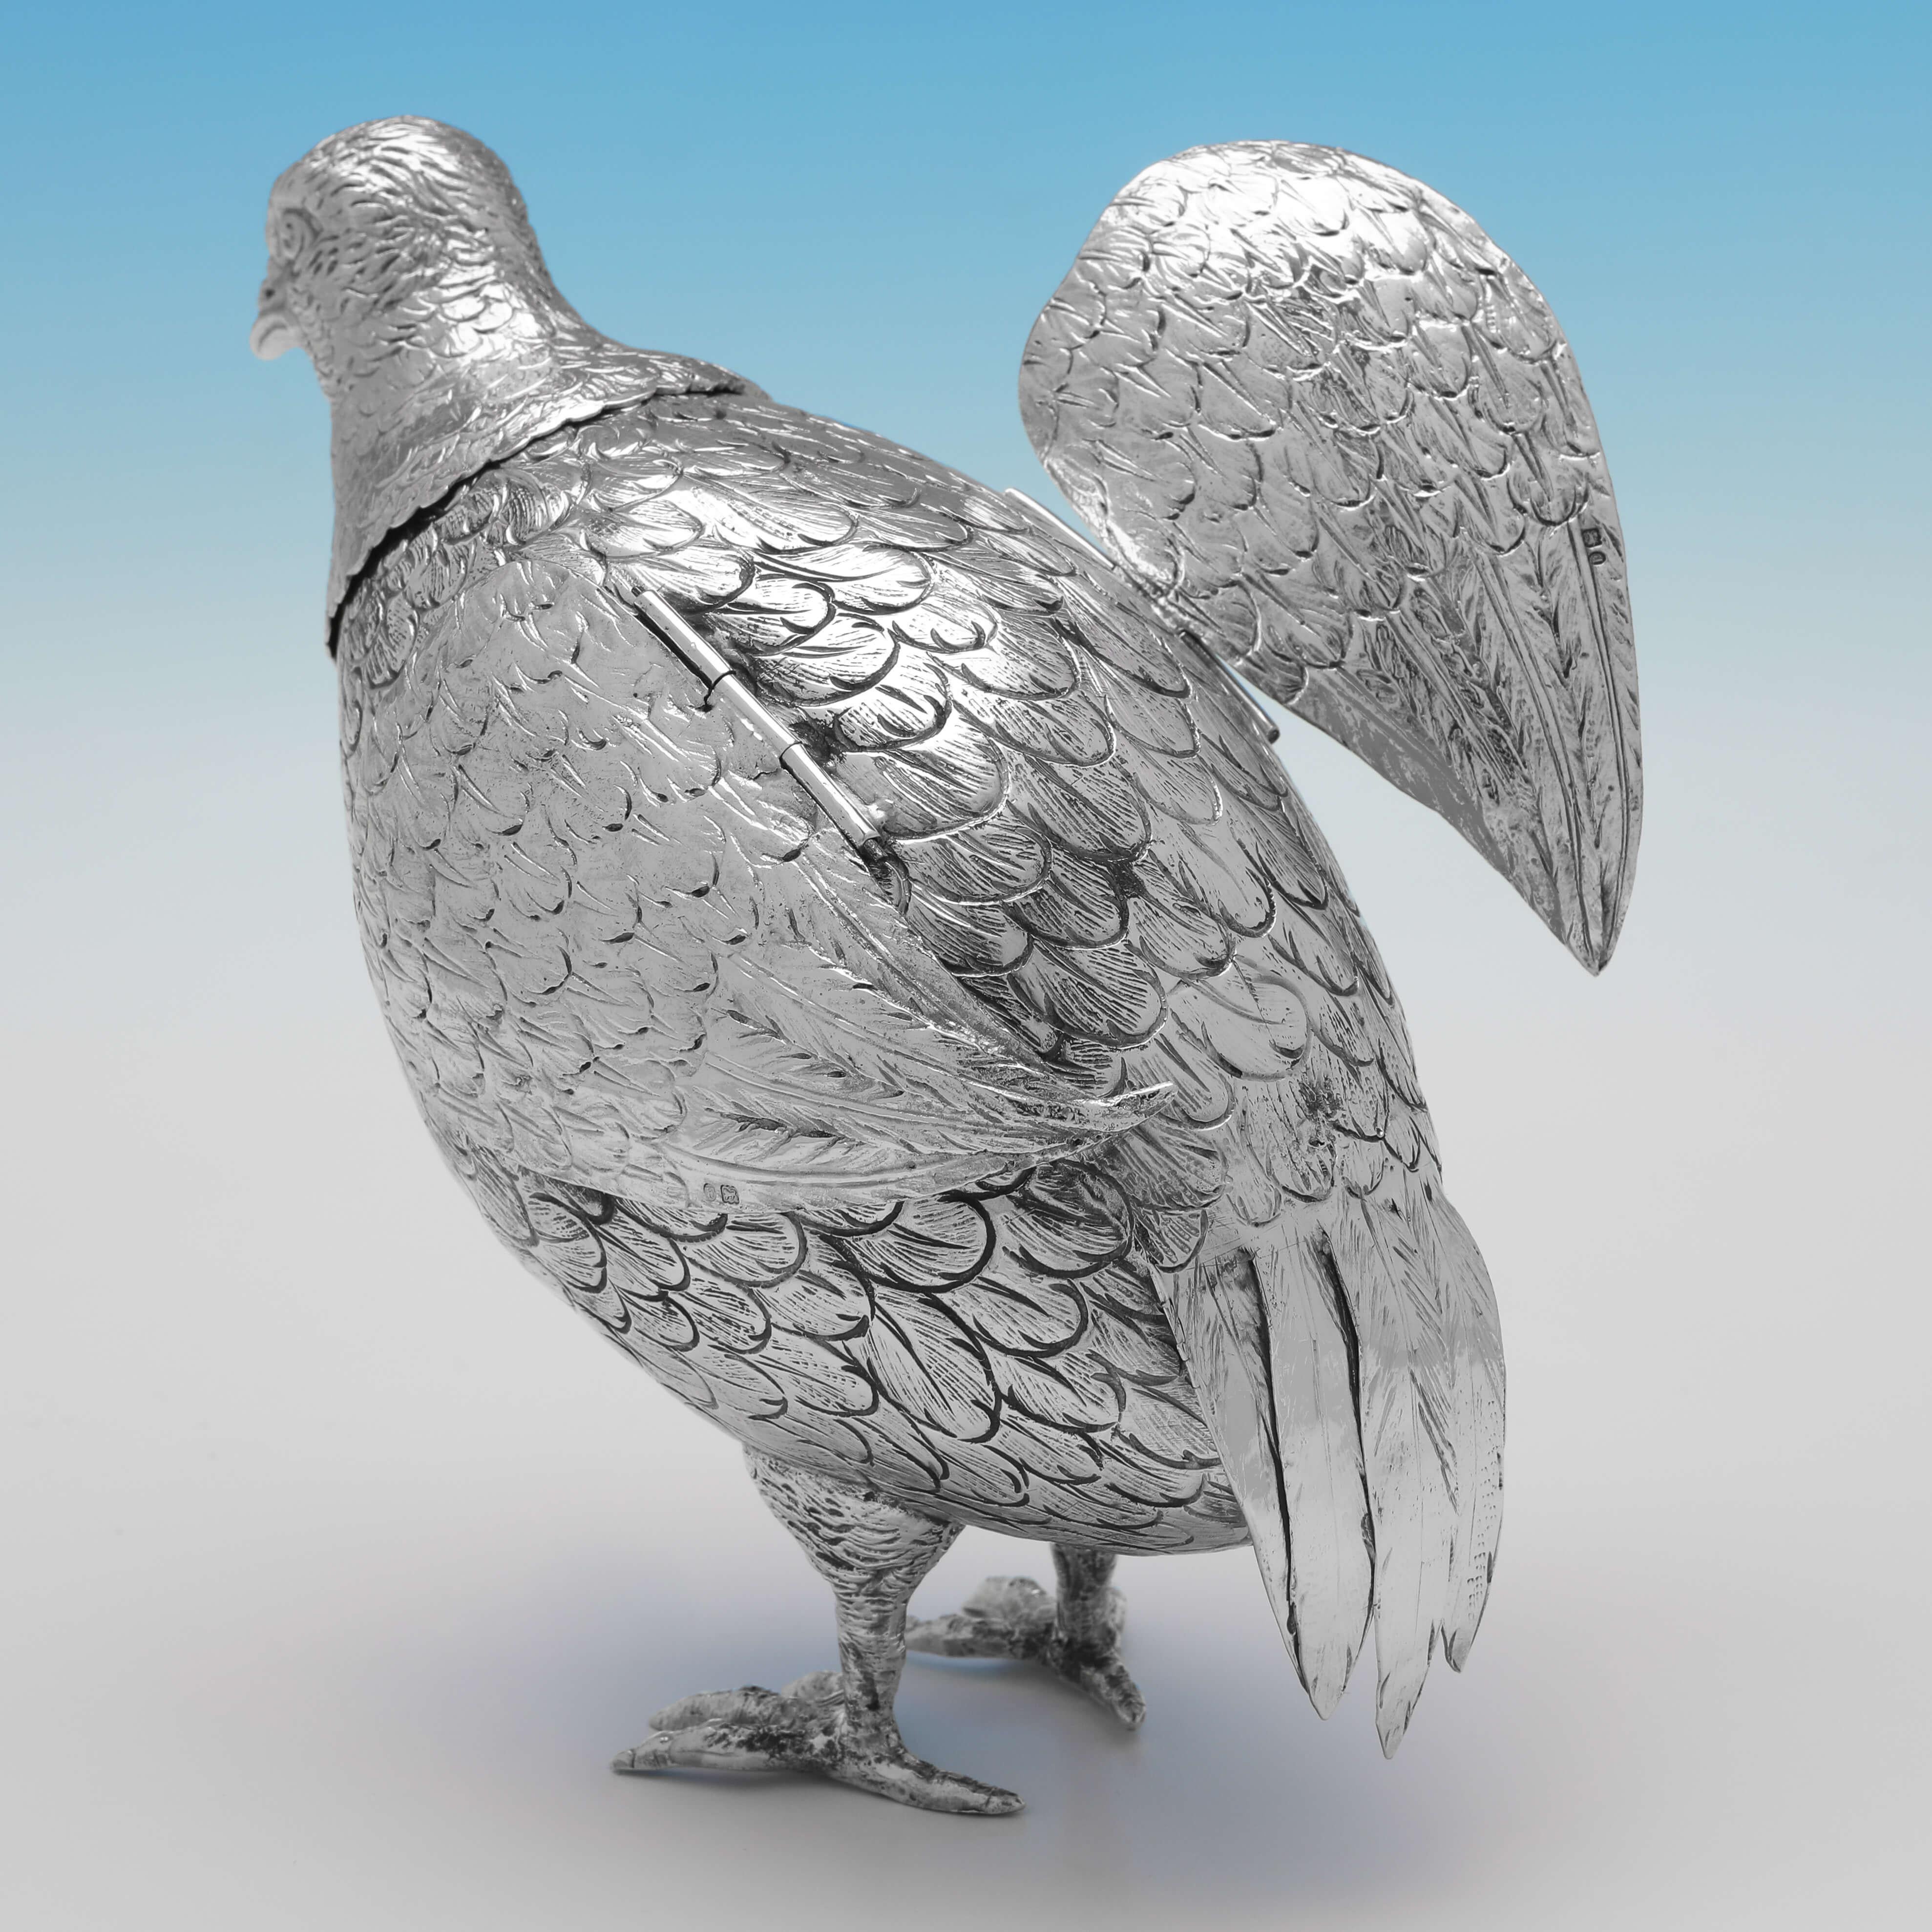 Matched Pair of Antique Sterling Silver Models of Partridges, 1897 & 1925 In Good Condition For Sale In London, London